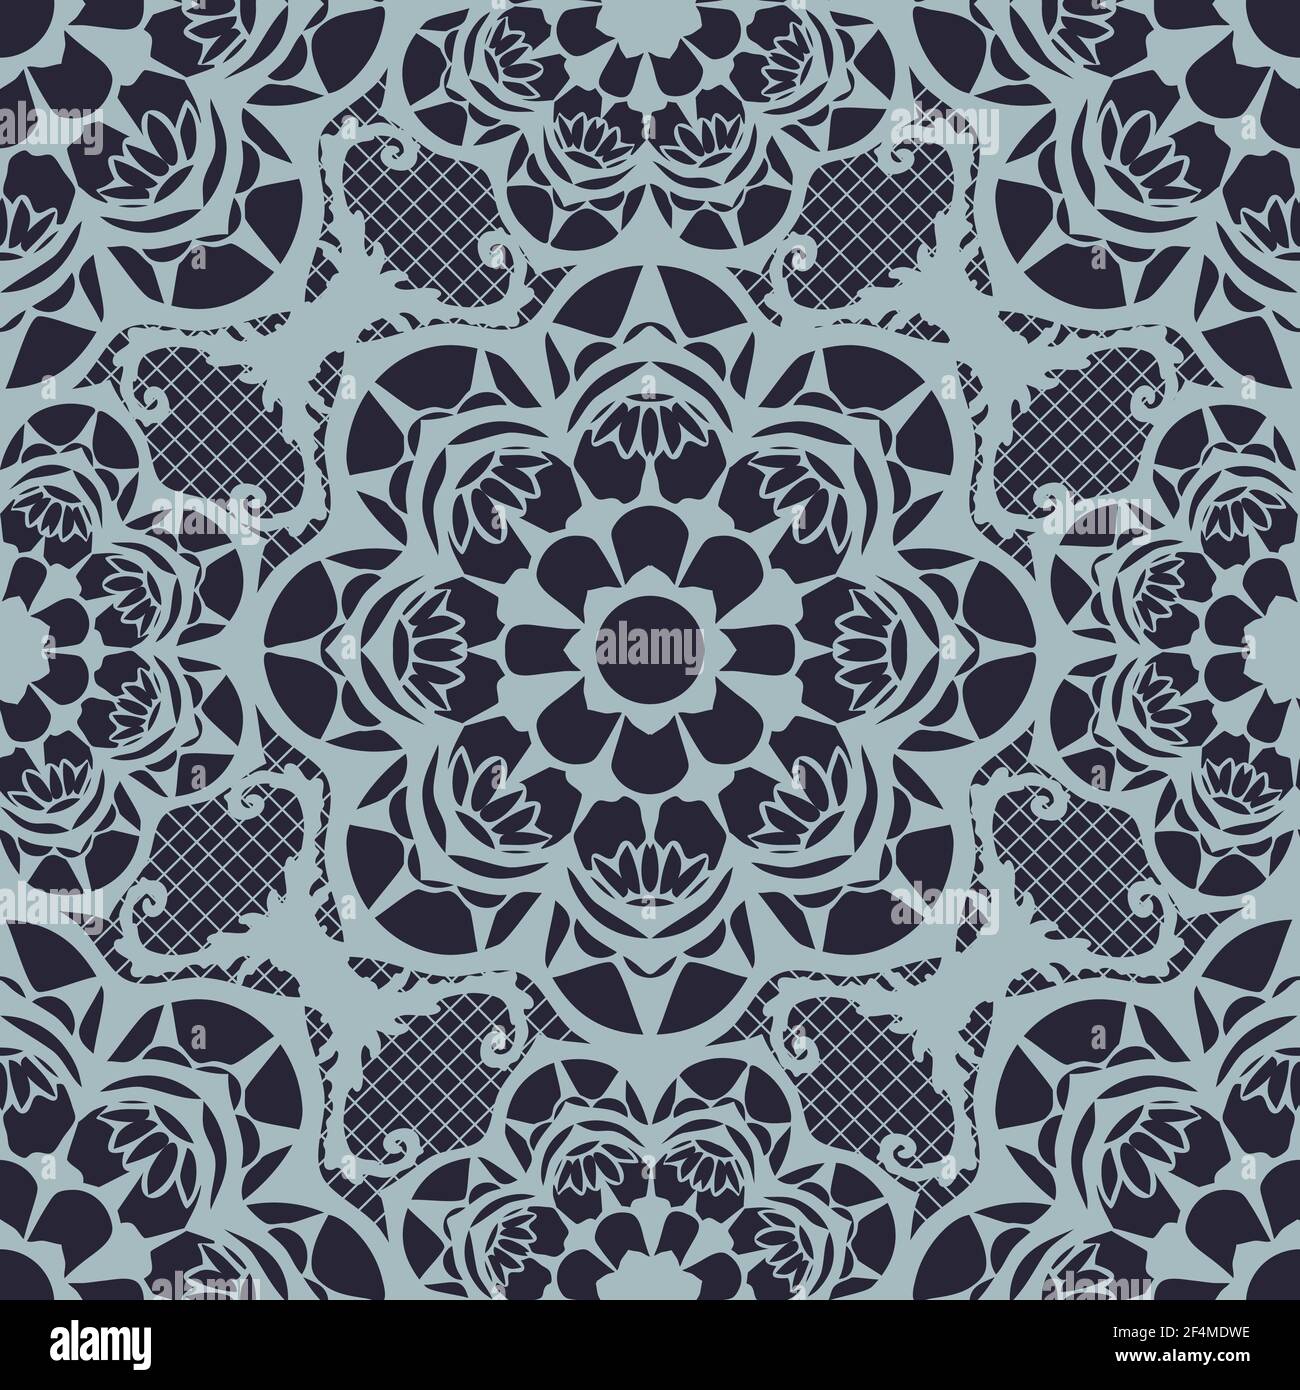 Seamless vector pattern lace texture on blue background. Simple embroidery mandala wallpaper design. Romantic fashion textile decoration. Stock Vector